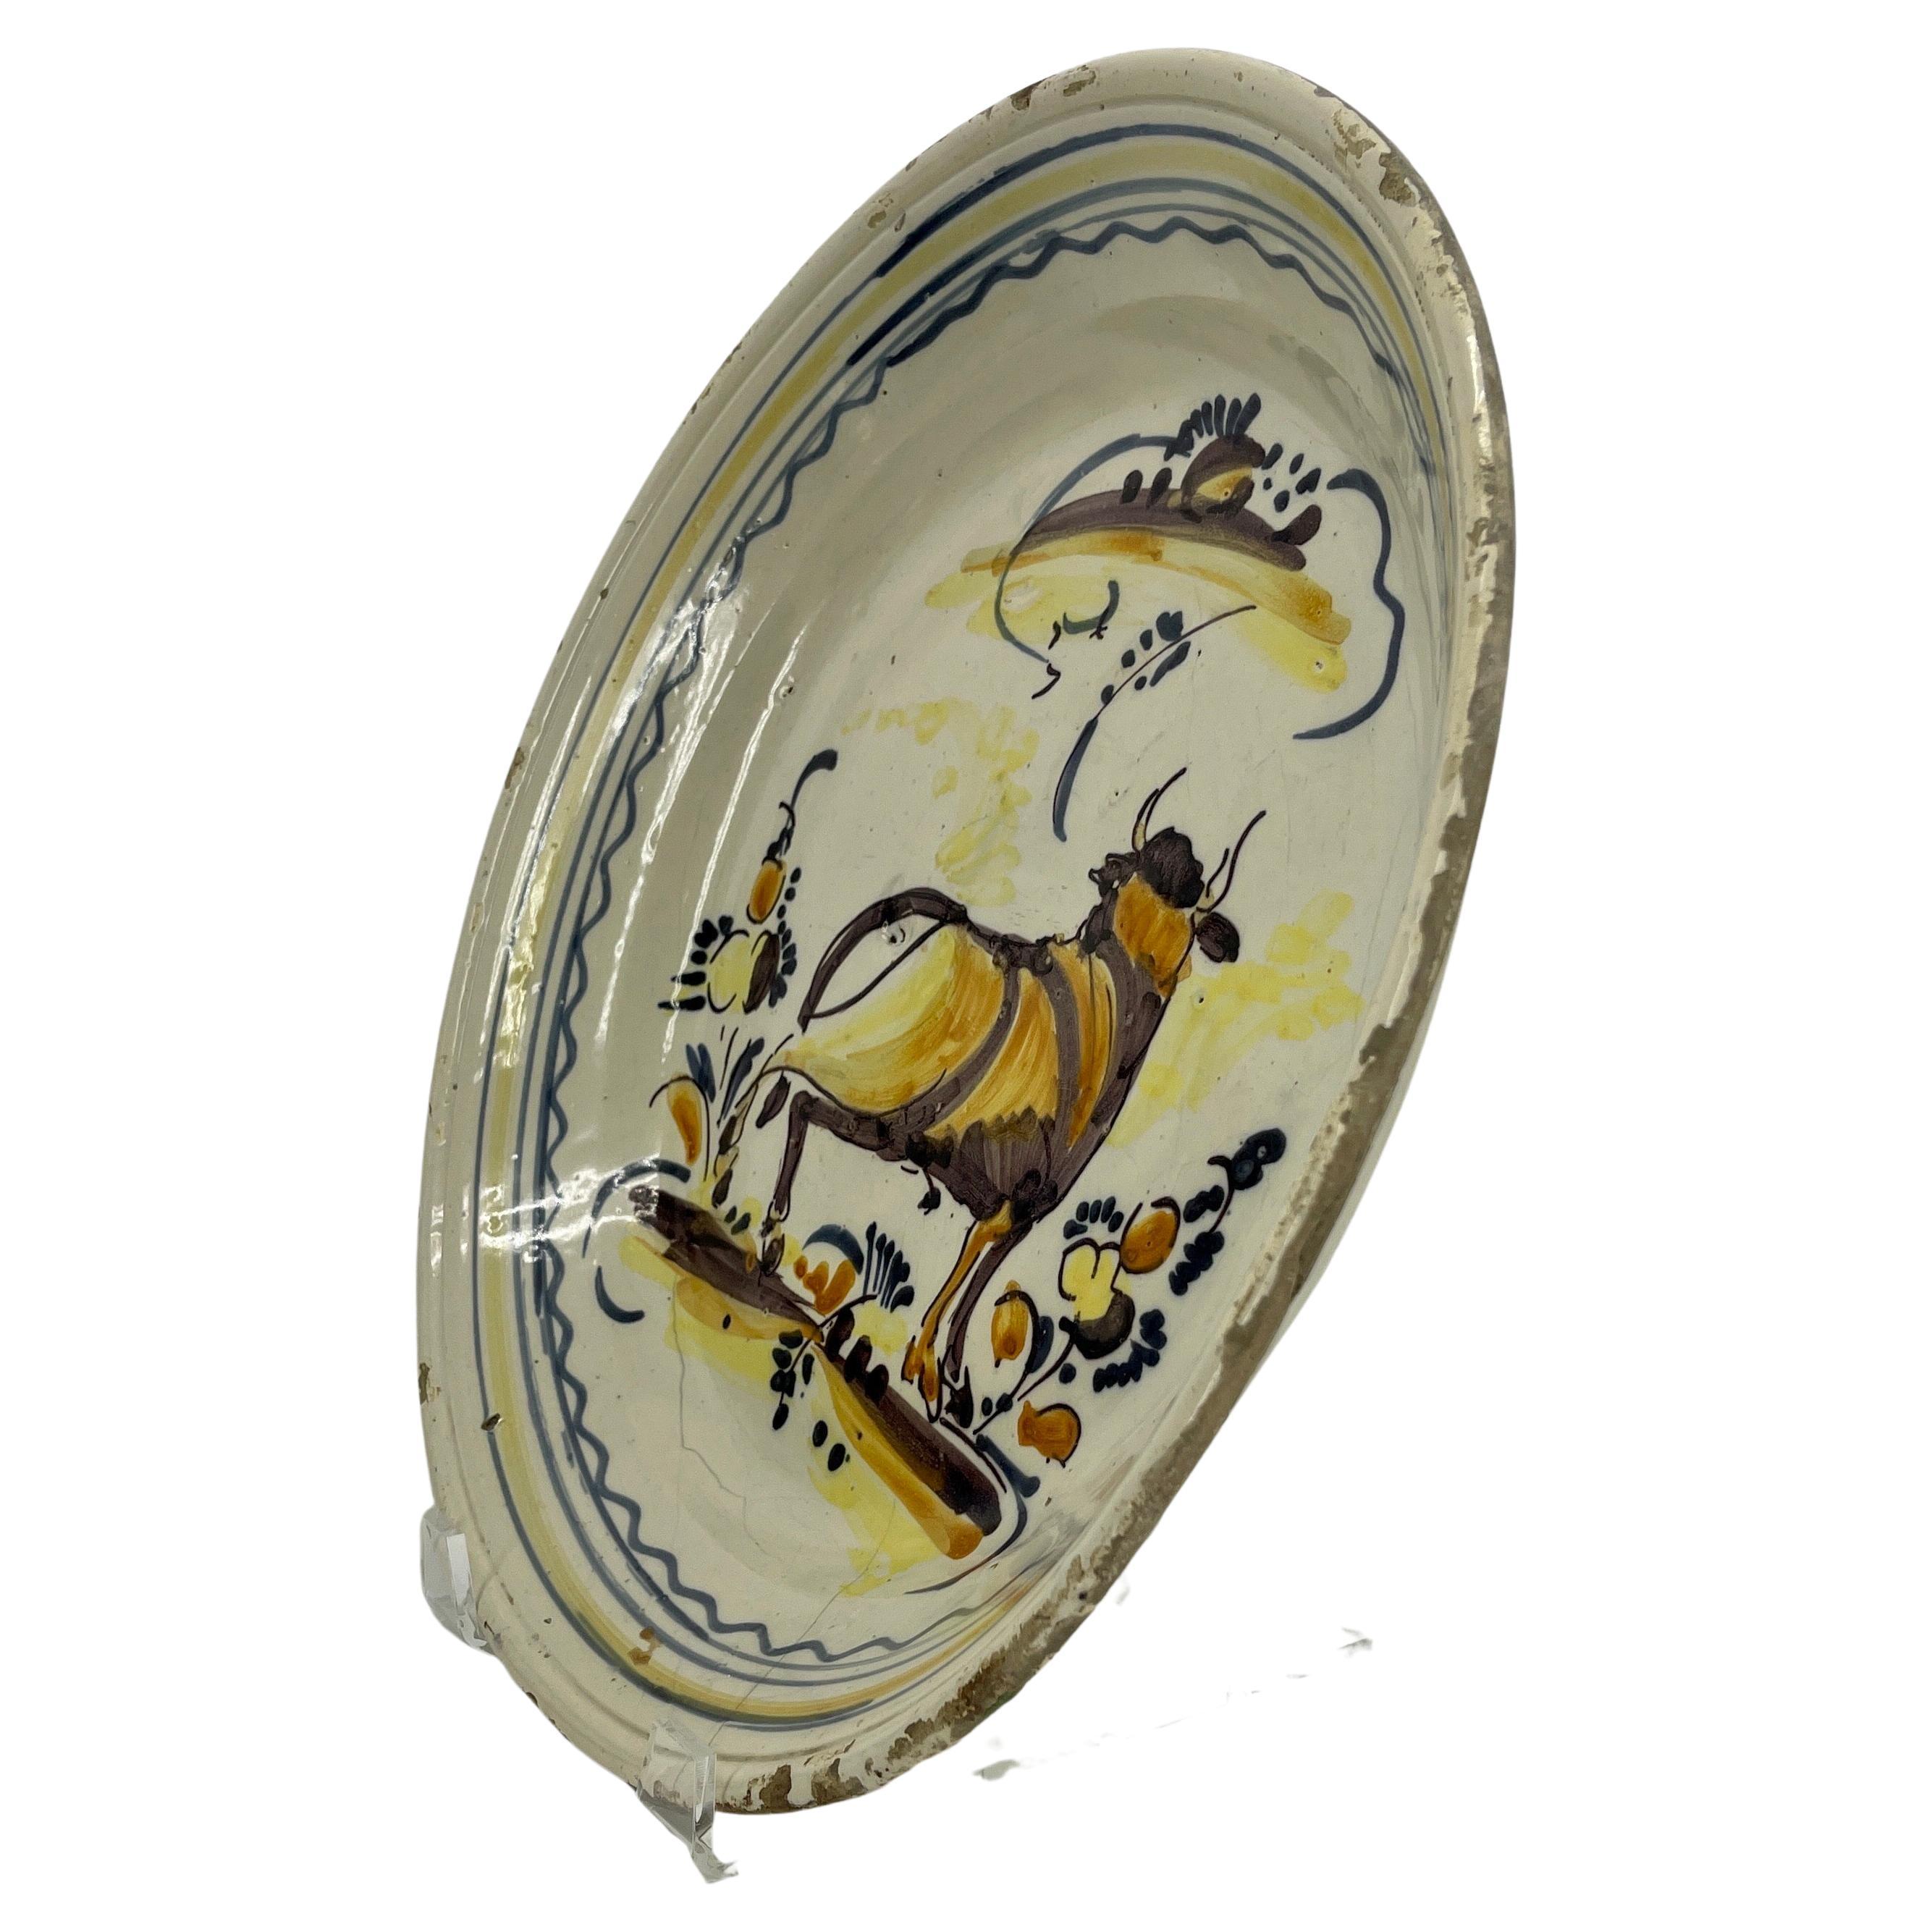 Circa 1800 Spanish Majolica Faience centerpiece bowl or charger.
This charming collectible antique painted ceramic dish is decorated with a large rear facing bull and with polychrome flowers.
  